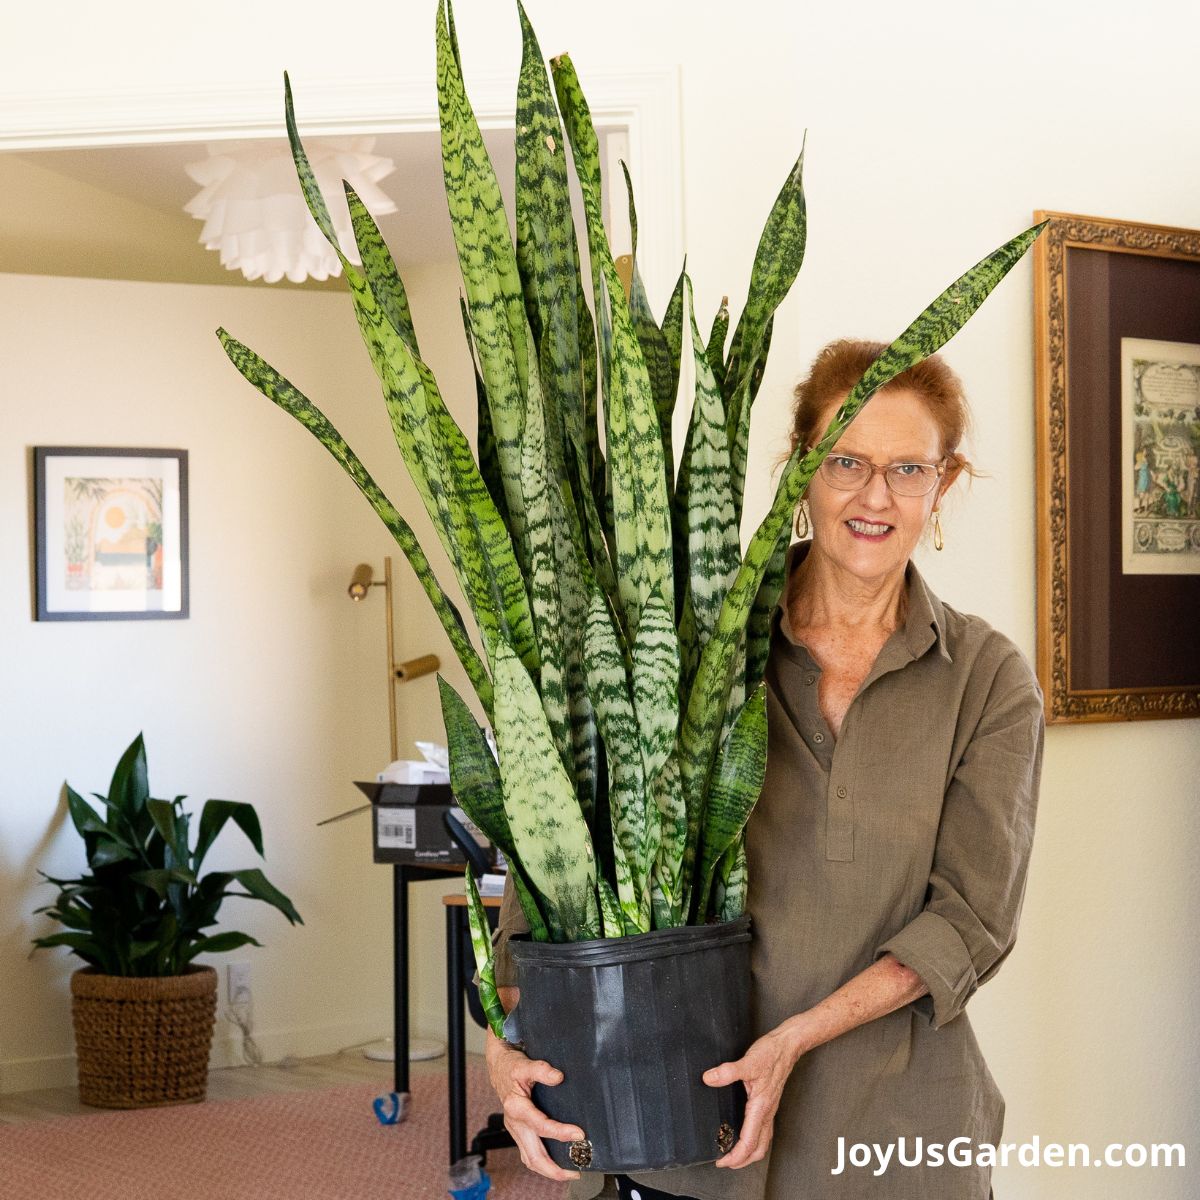 nell foster in brown shirt standing indoors holding a Sansevieria snake plant in black grow pot 